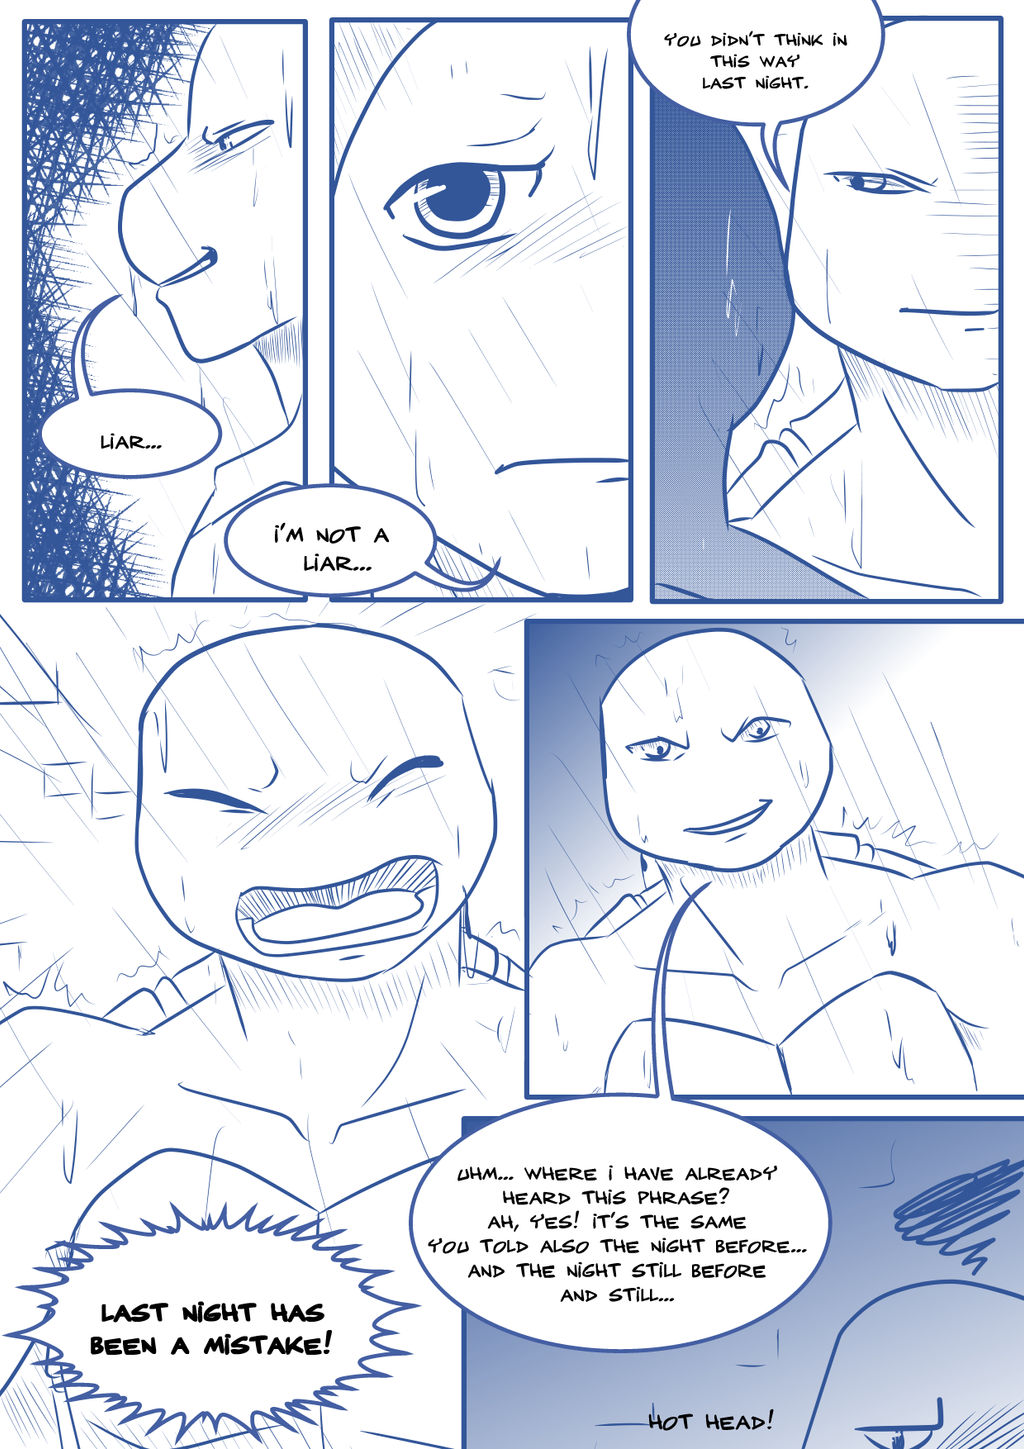 Tmnt Burning Passion Chapter 1 Page 10 By Kameboxer On Deviantart